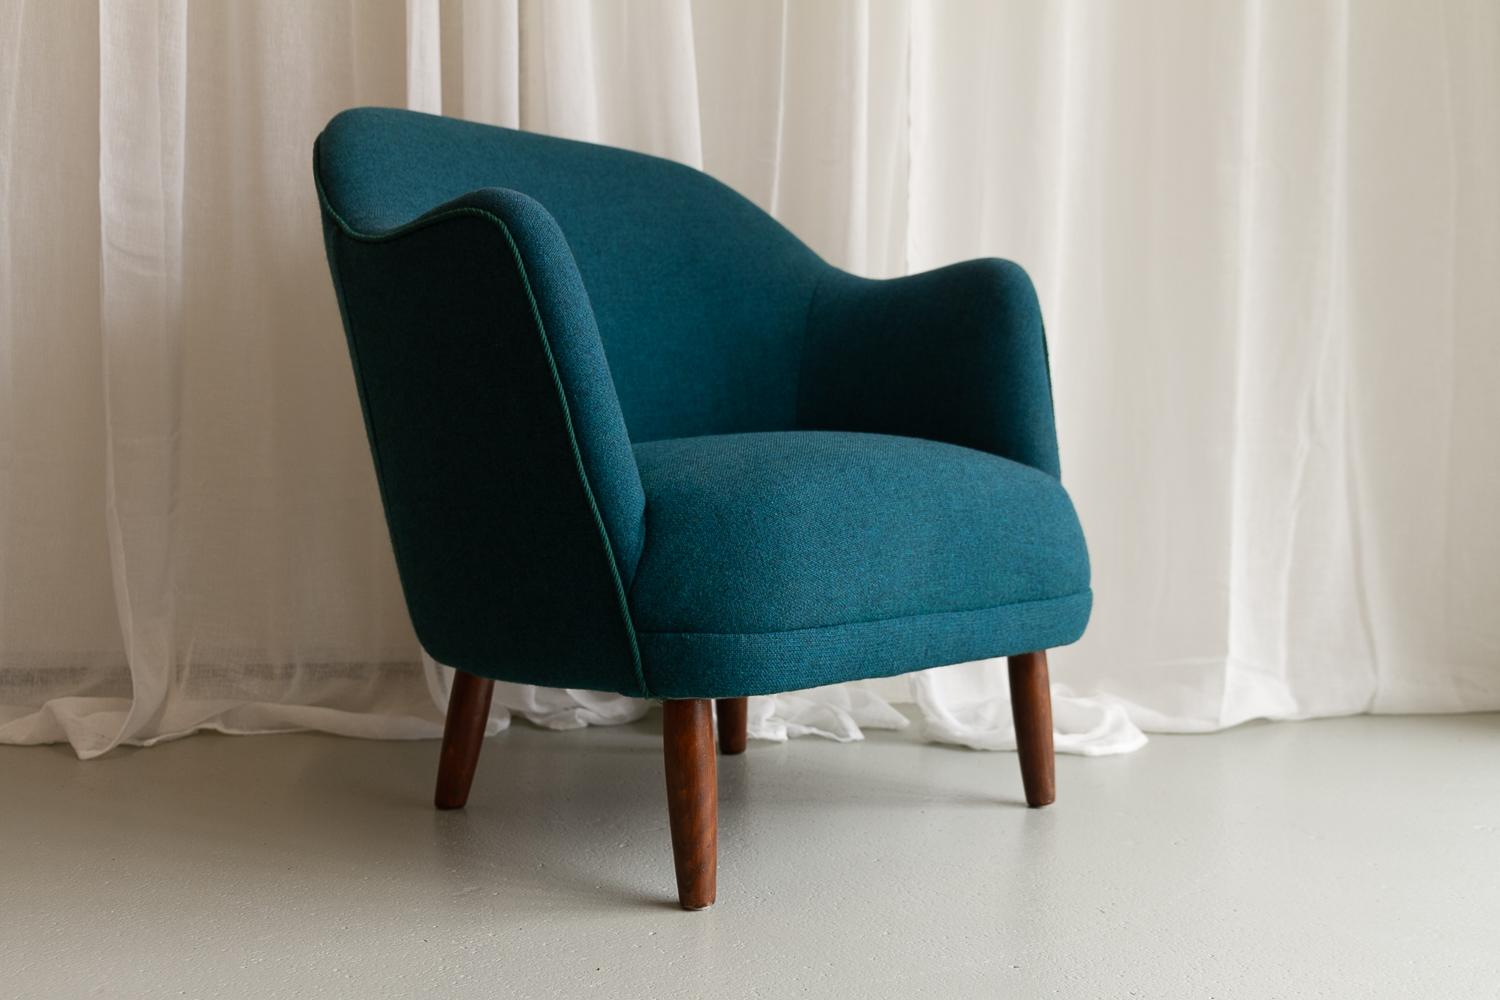 Mid-20th Century Danish Modern Easy Chair in Teal Blue, 1950s. For Sale